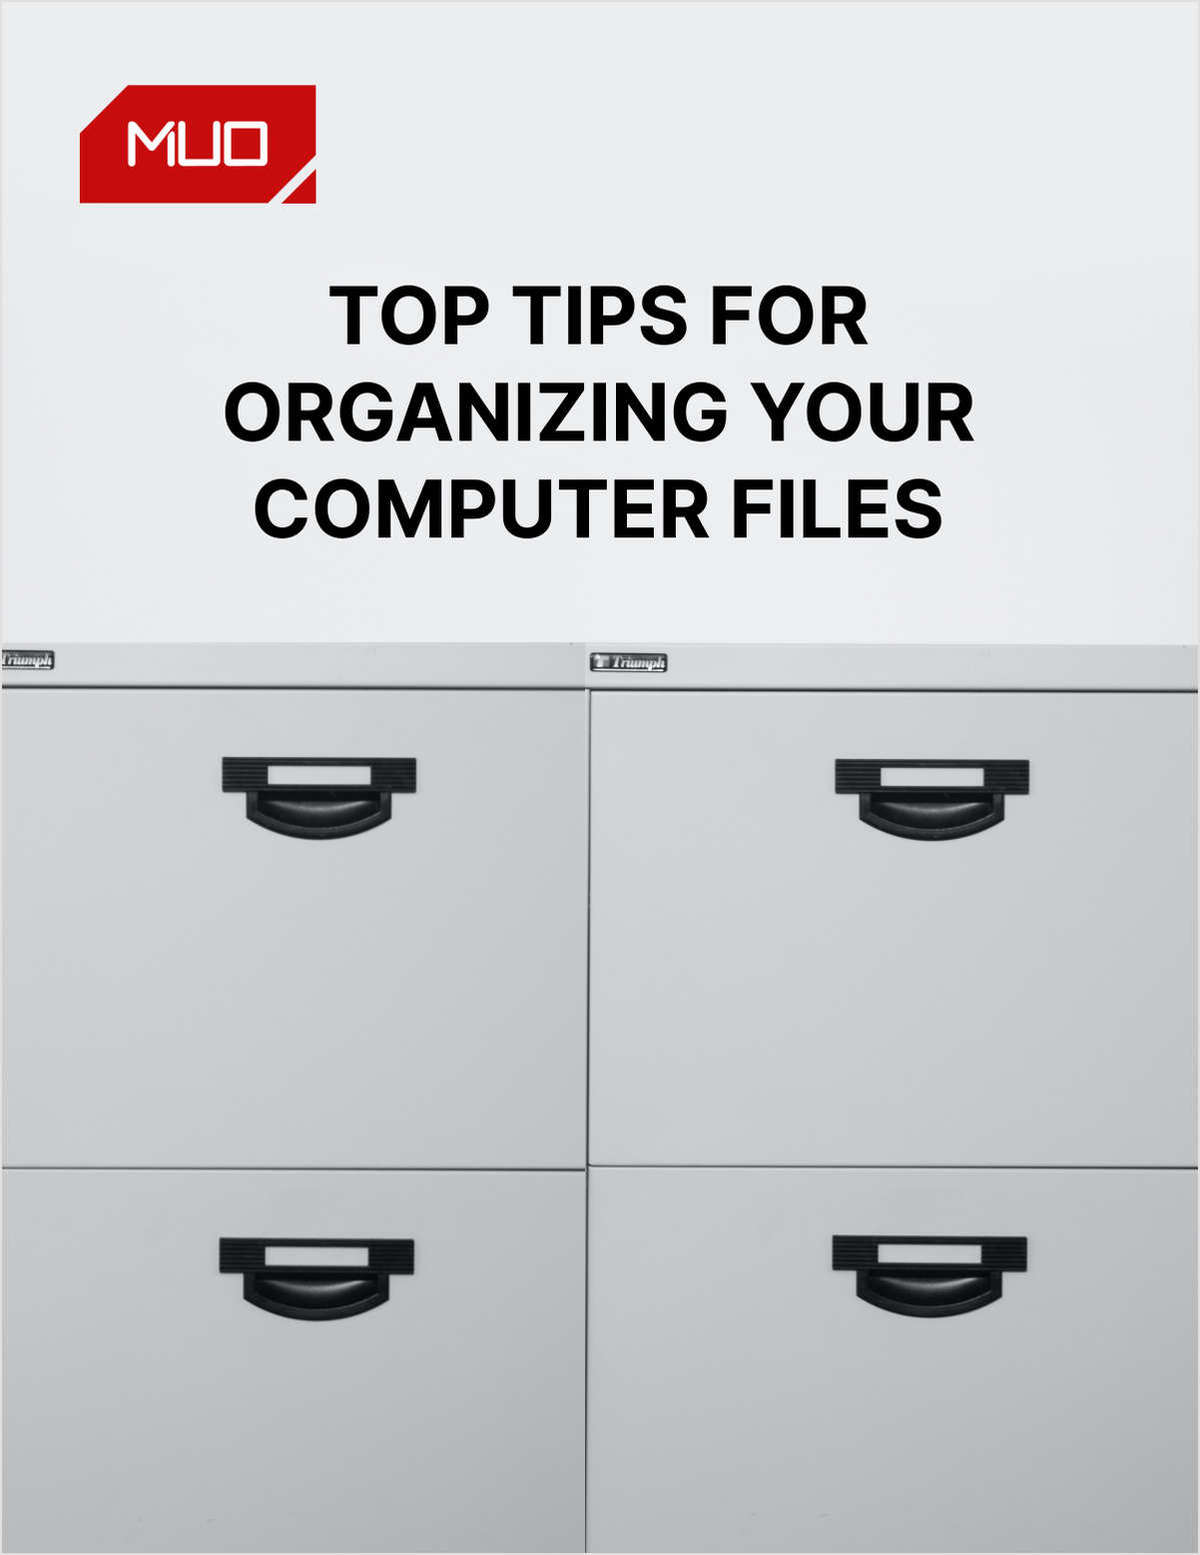 Key Tips for Managing and Organizing Your Computer Files